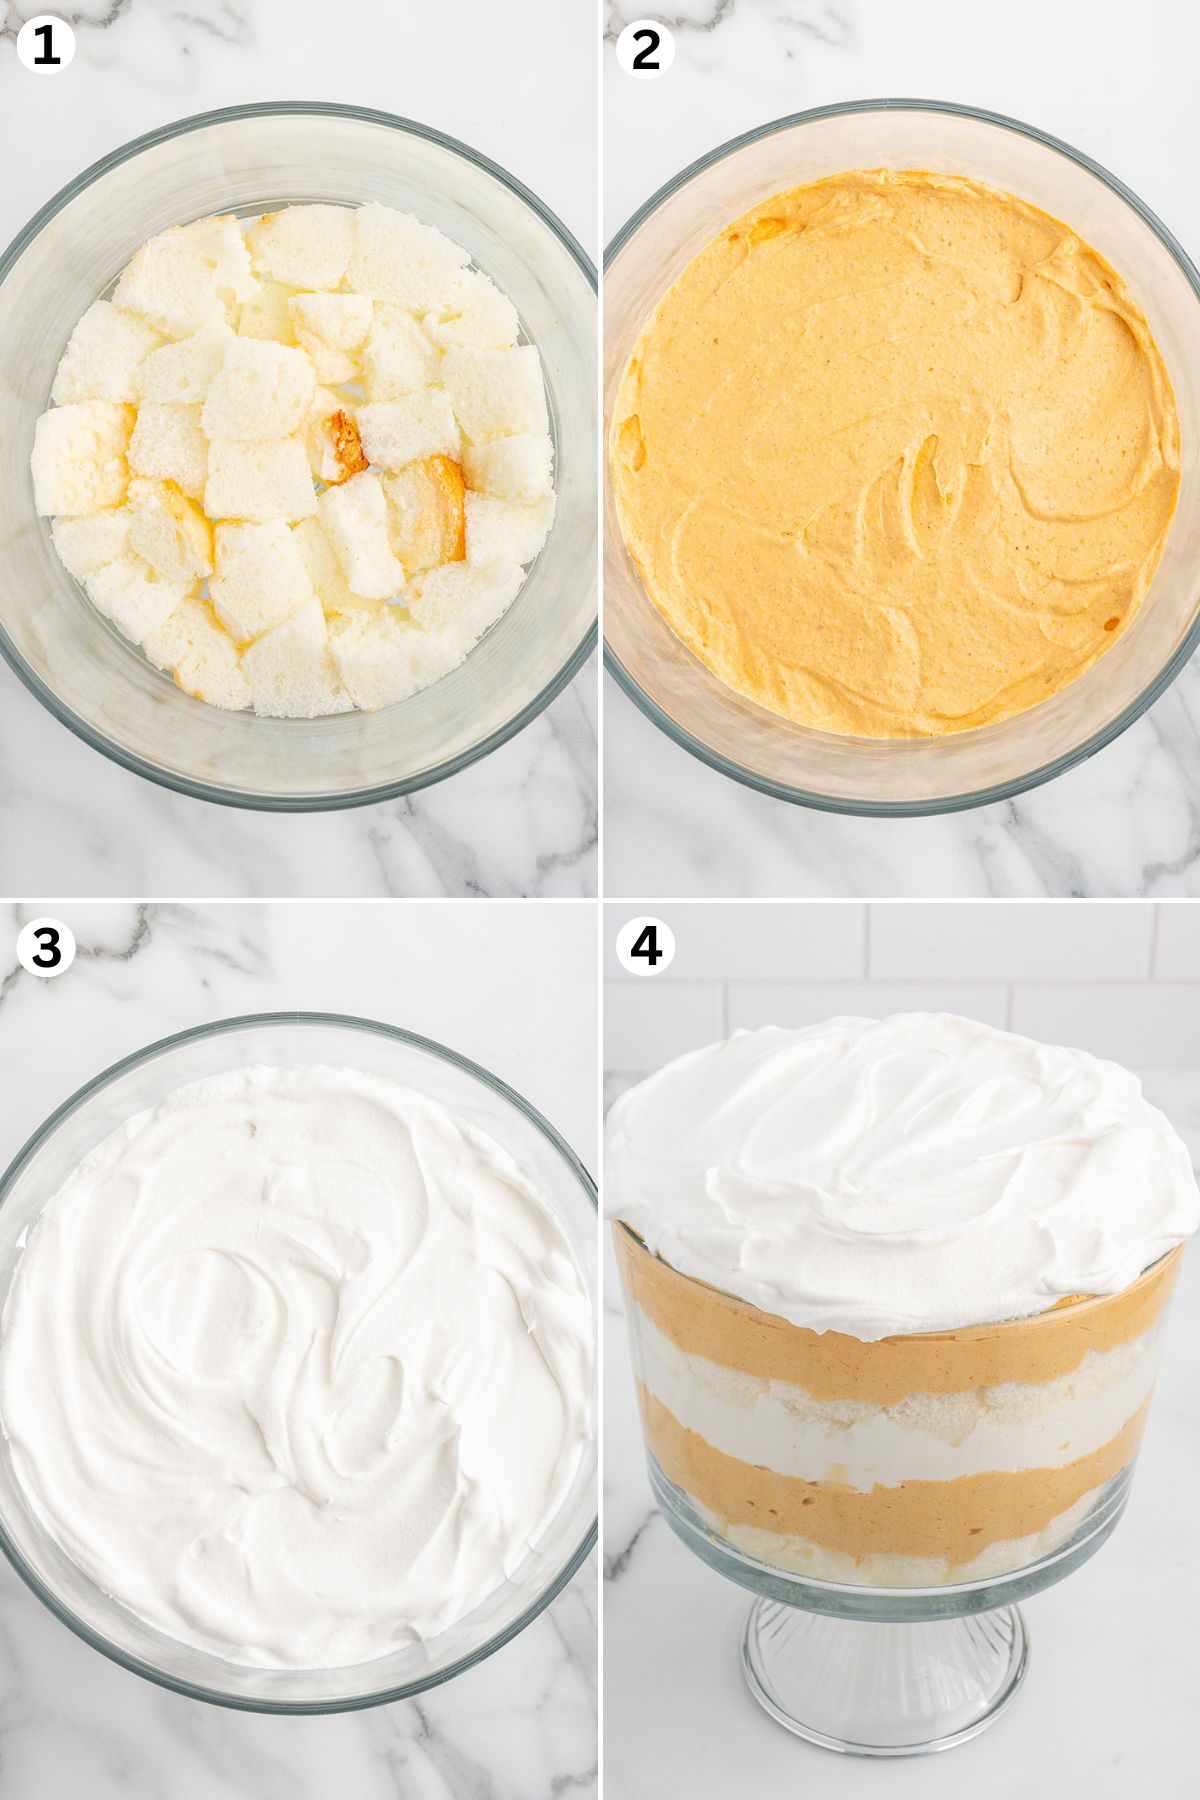 Create a layer of cake cubes at the bottom of the trifle dish. Use a spatula to smooth the pumpkin cheesecake evenly. Repeat layers as follows: cake cubes, pumpkin cheesecake, whipped topping.